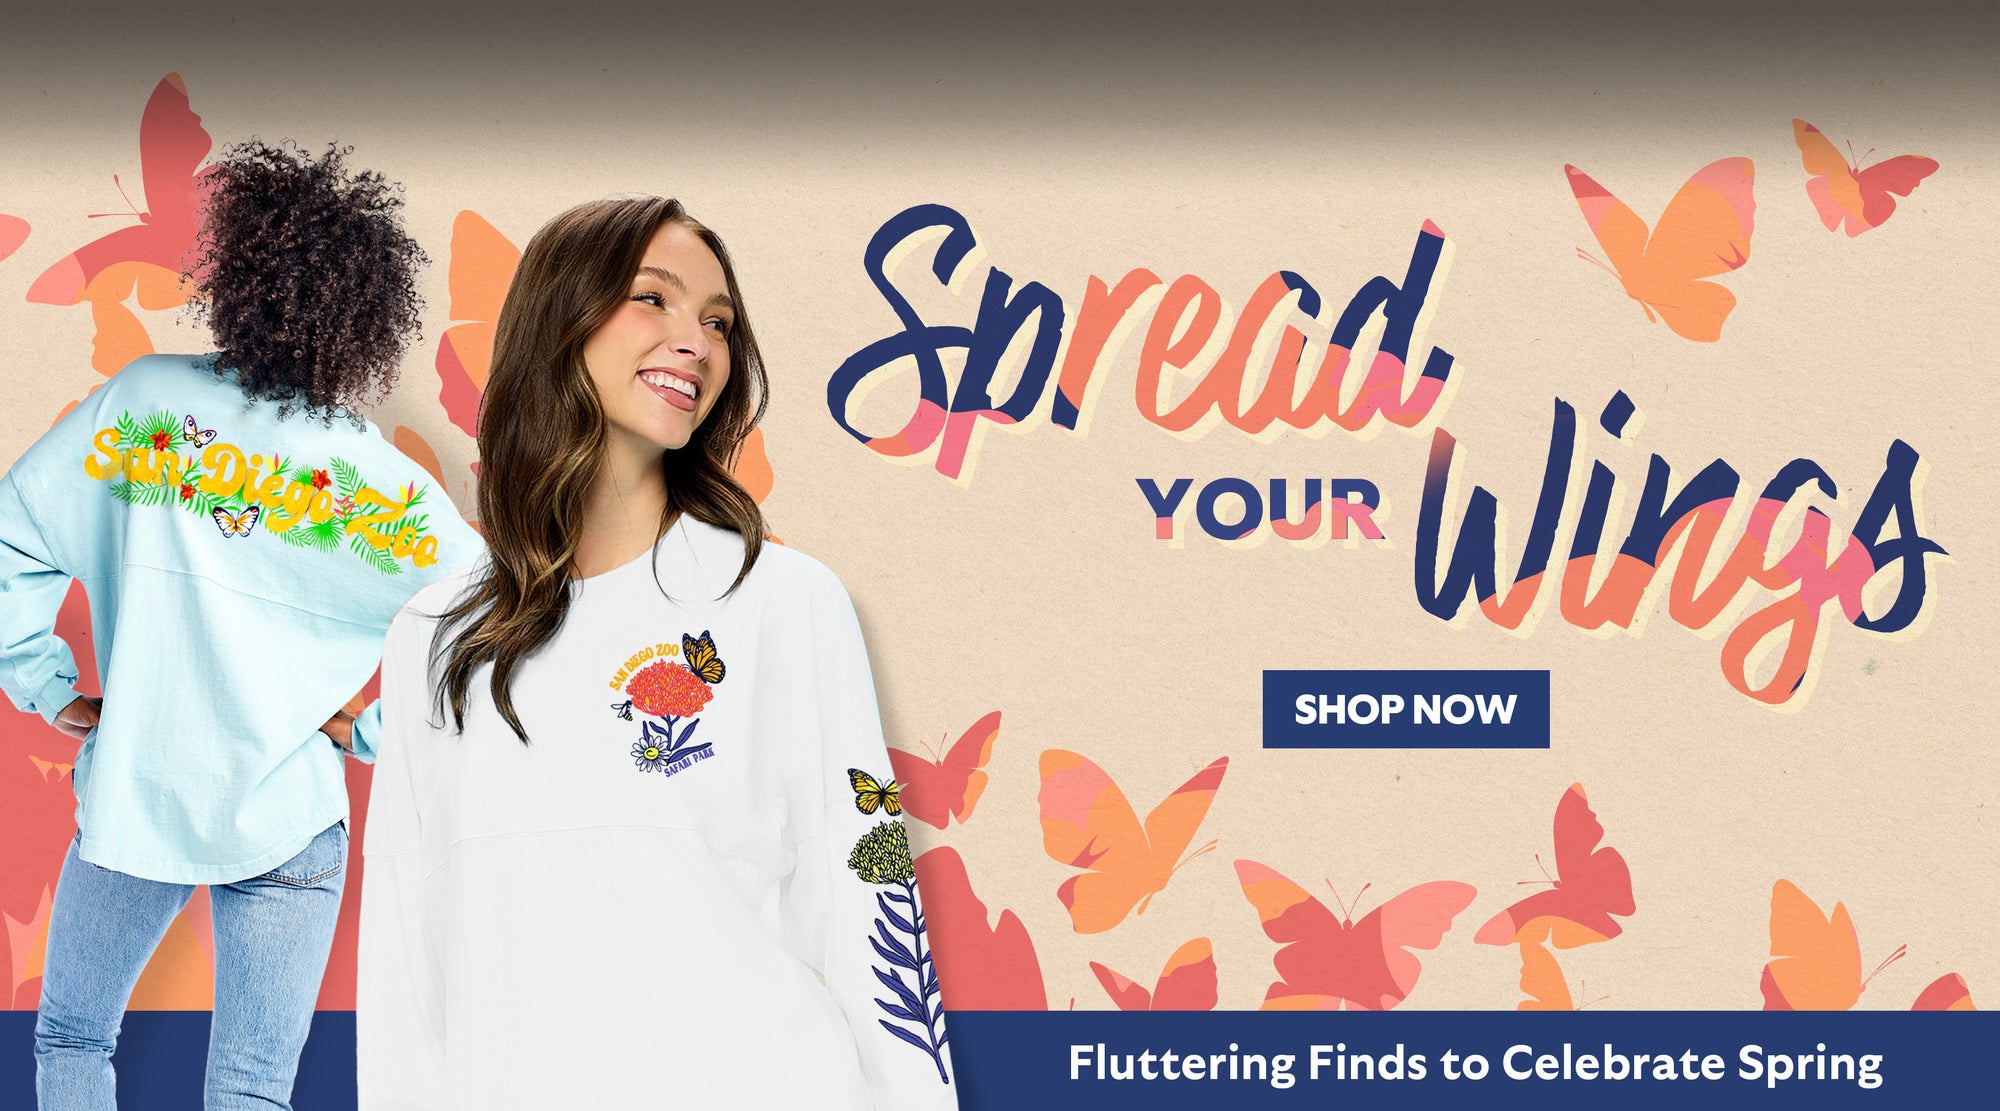 Spread Your Wings with our Spring Merchandise Collection